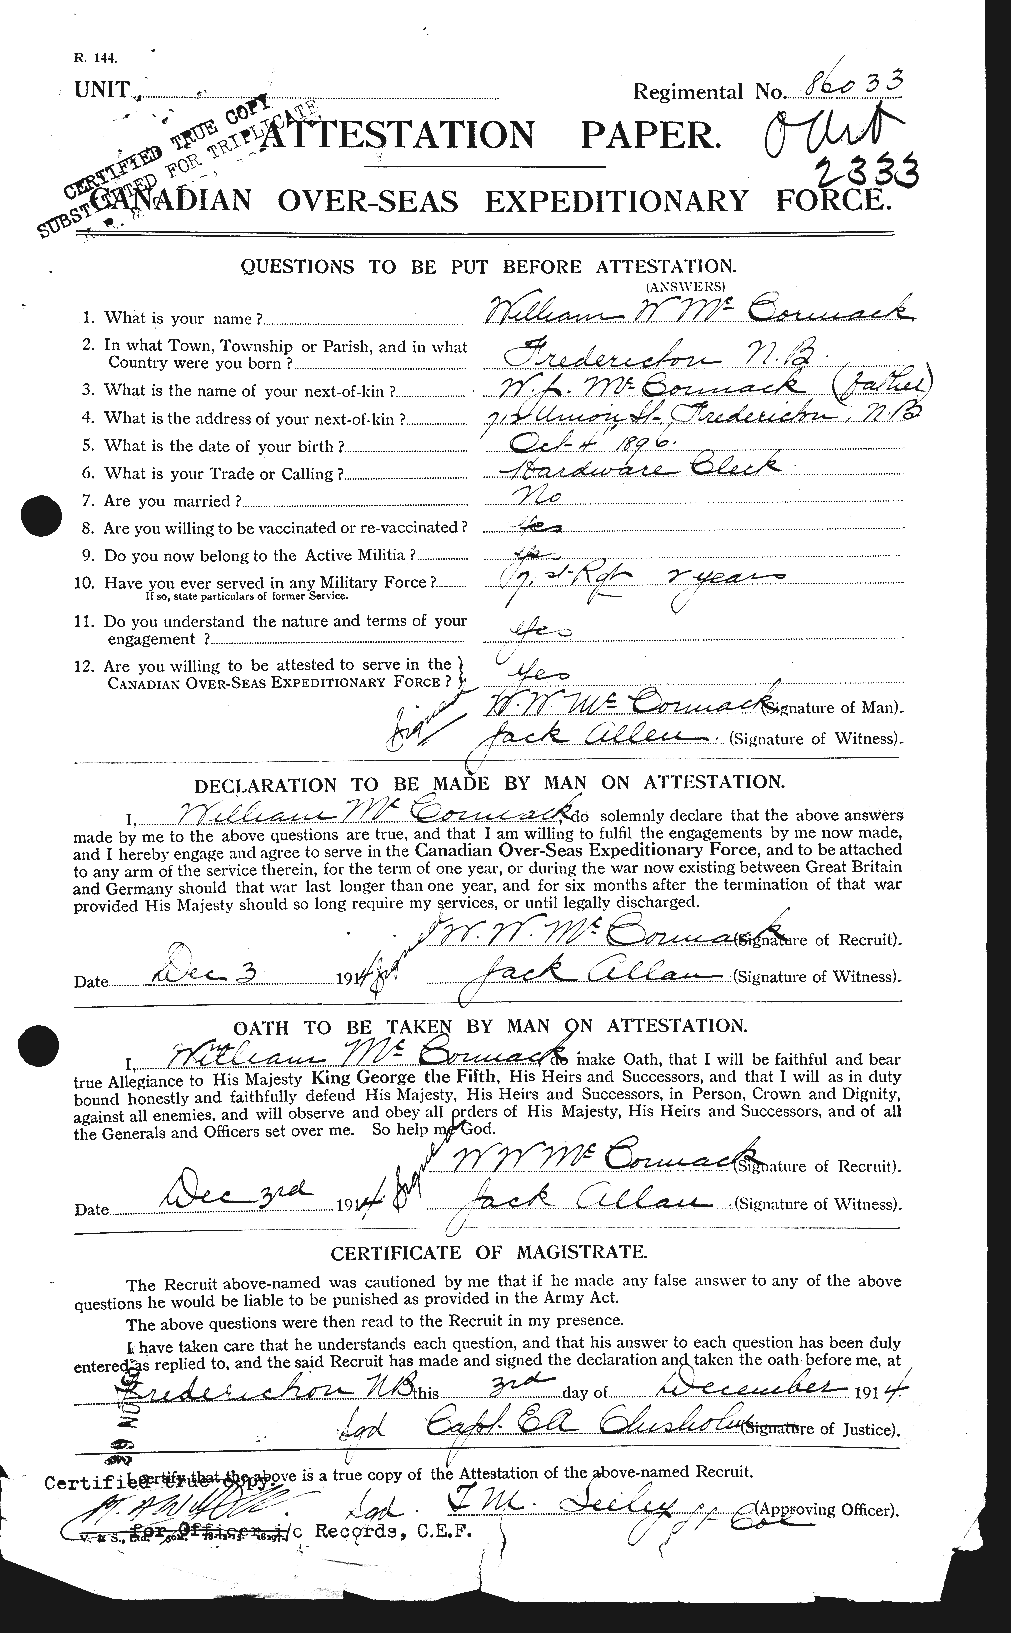 Personnel Records of the First World War - CEF 133837a